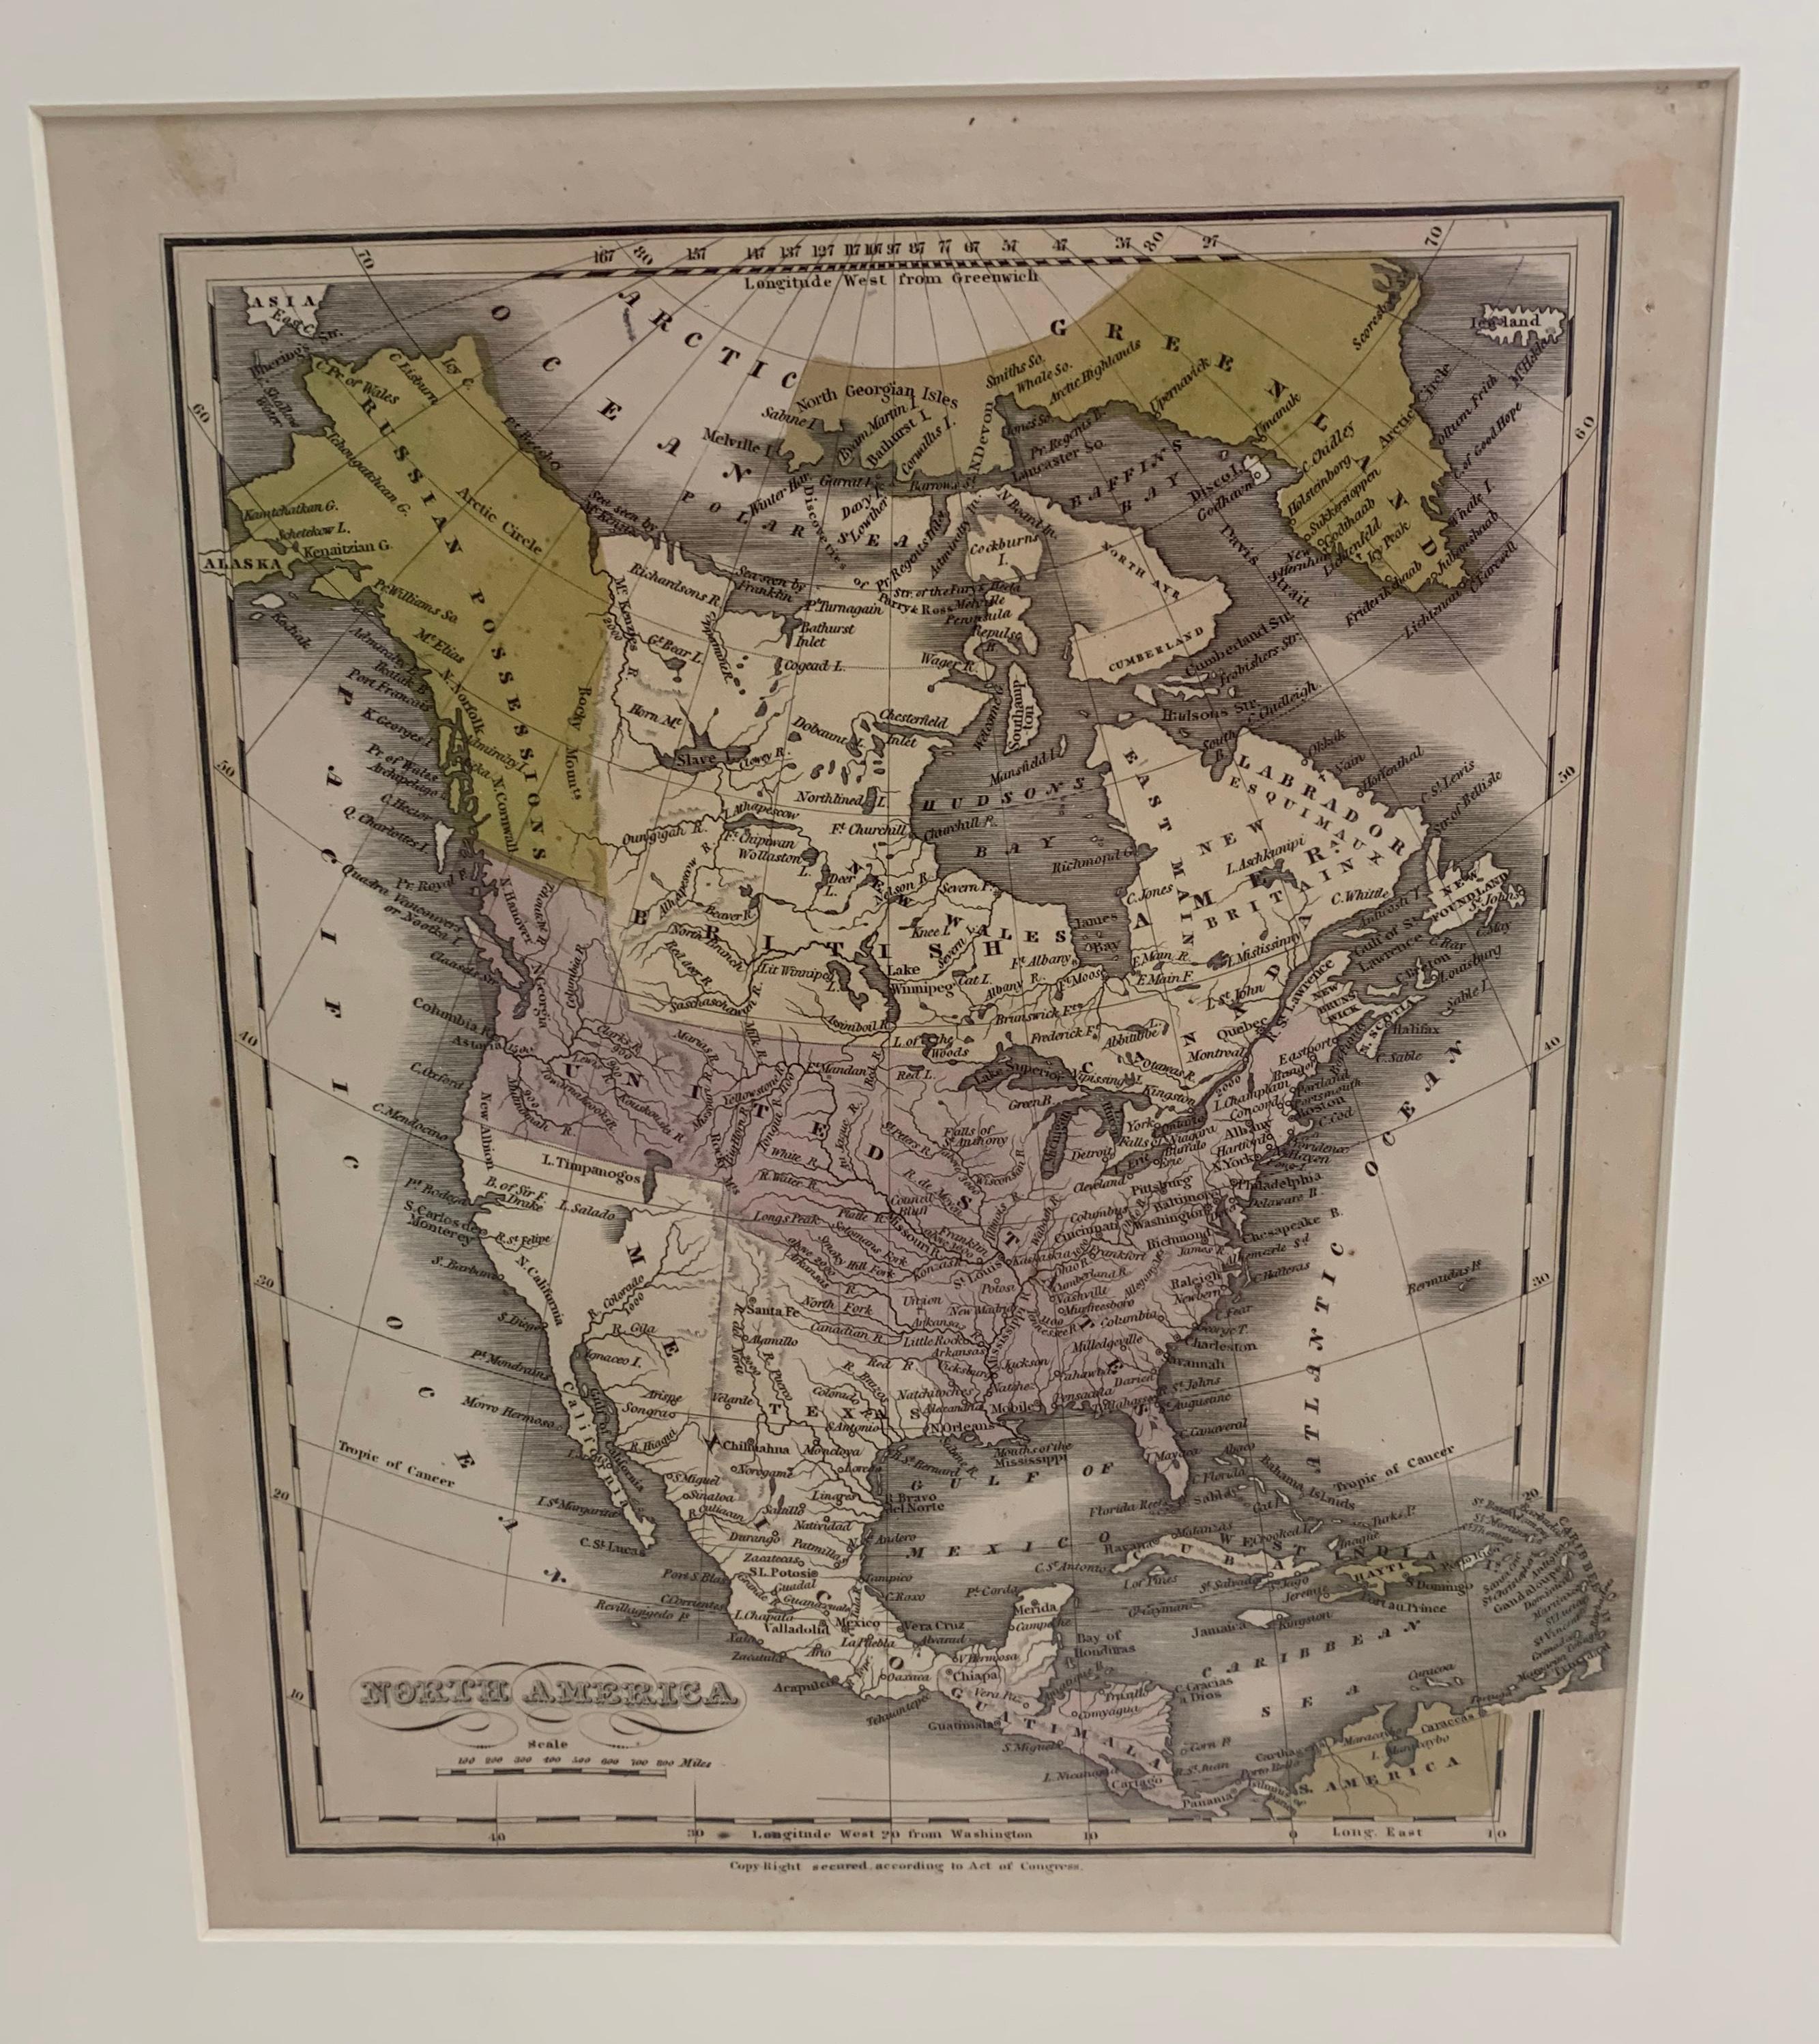 Map of North America published circa 1830. Map shows United States into Canada. Mexico extending into the upper California territory. Texas appears in name but prior to the period of the republic. Framed in giltwood frame.